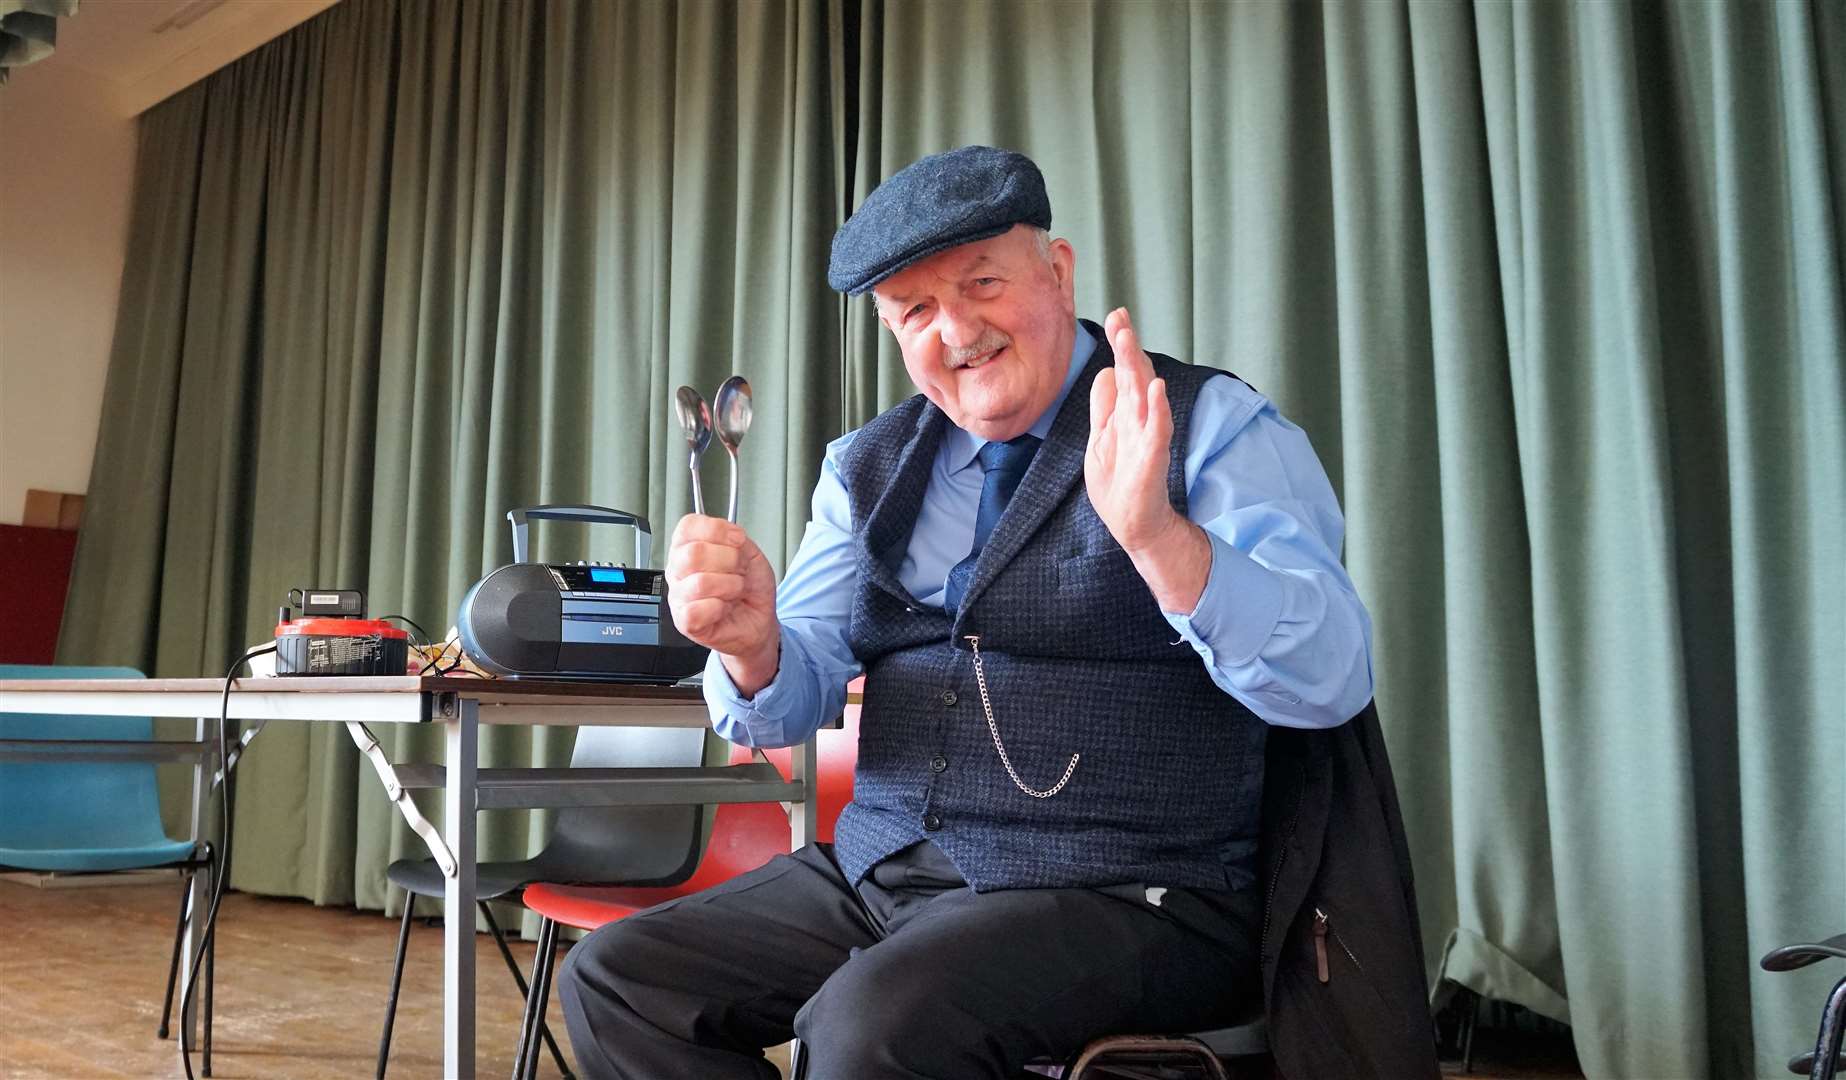 Willie Mackay turned up to play some merry tunes on the spoons. Picture: DGS